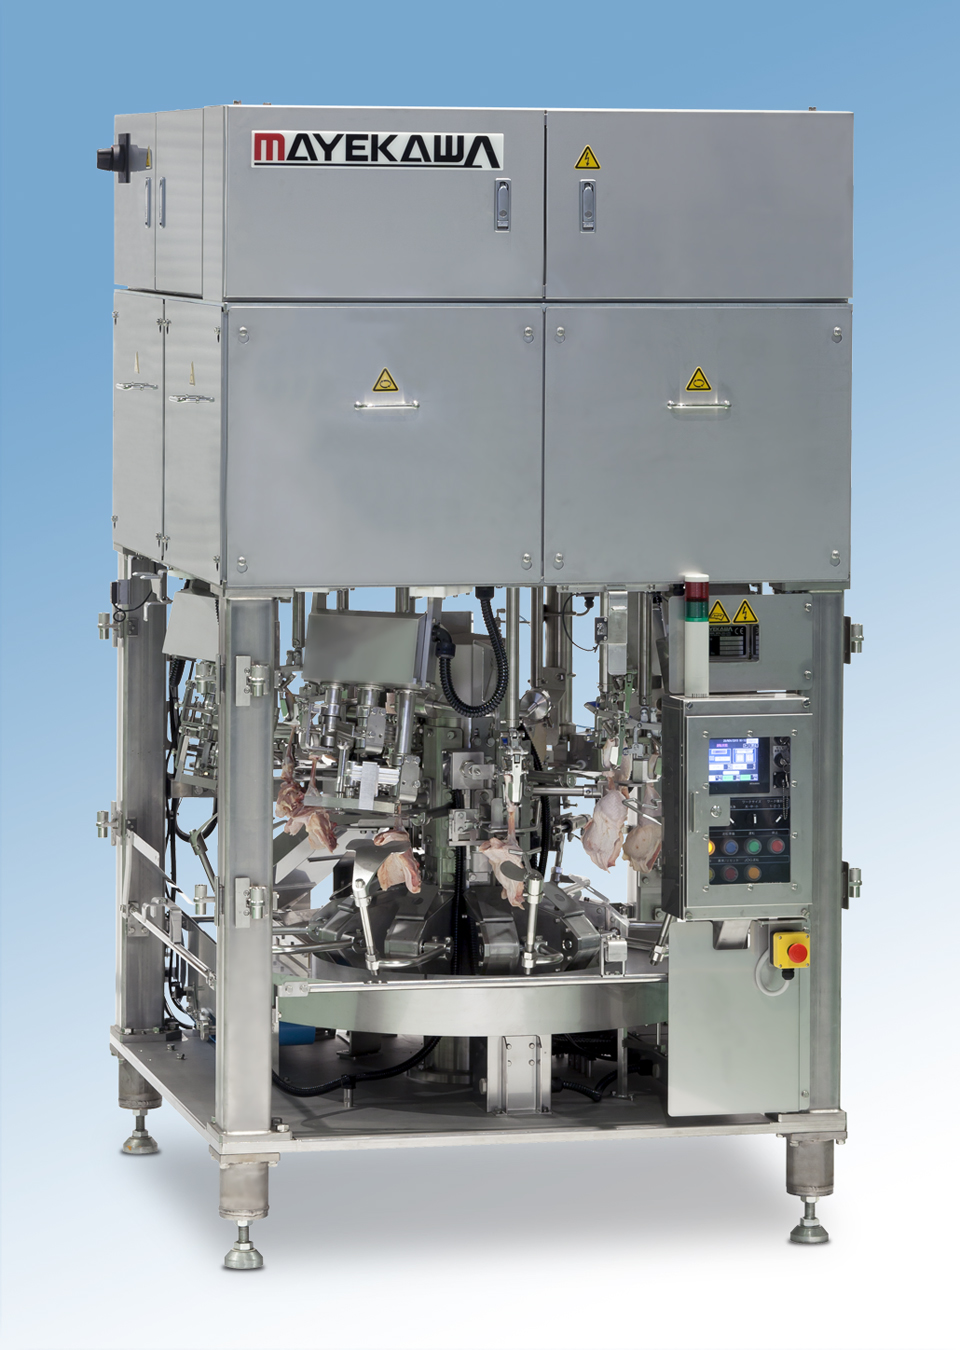 The TORIDAS Mark II from Mayekawa delivers high-quality, high-yield automated whole leg deboning capabilities. Gainco, Inc. has been named the exclusive authorized distributor of Mayekawa equipment.